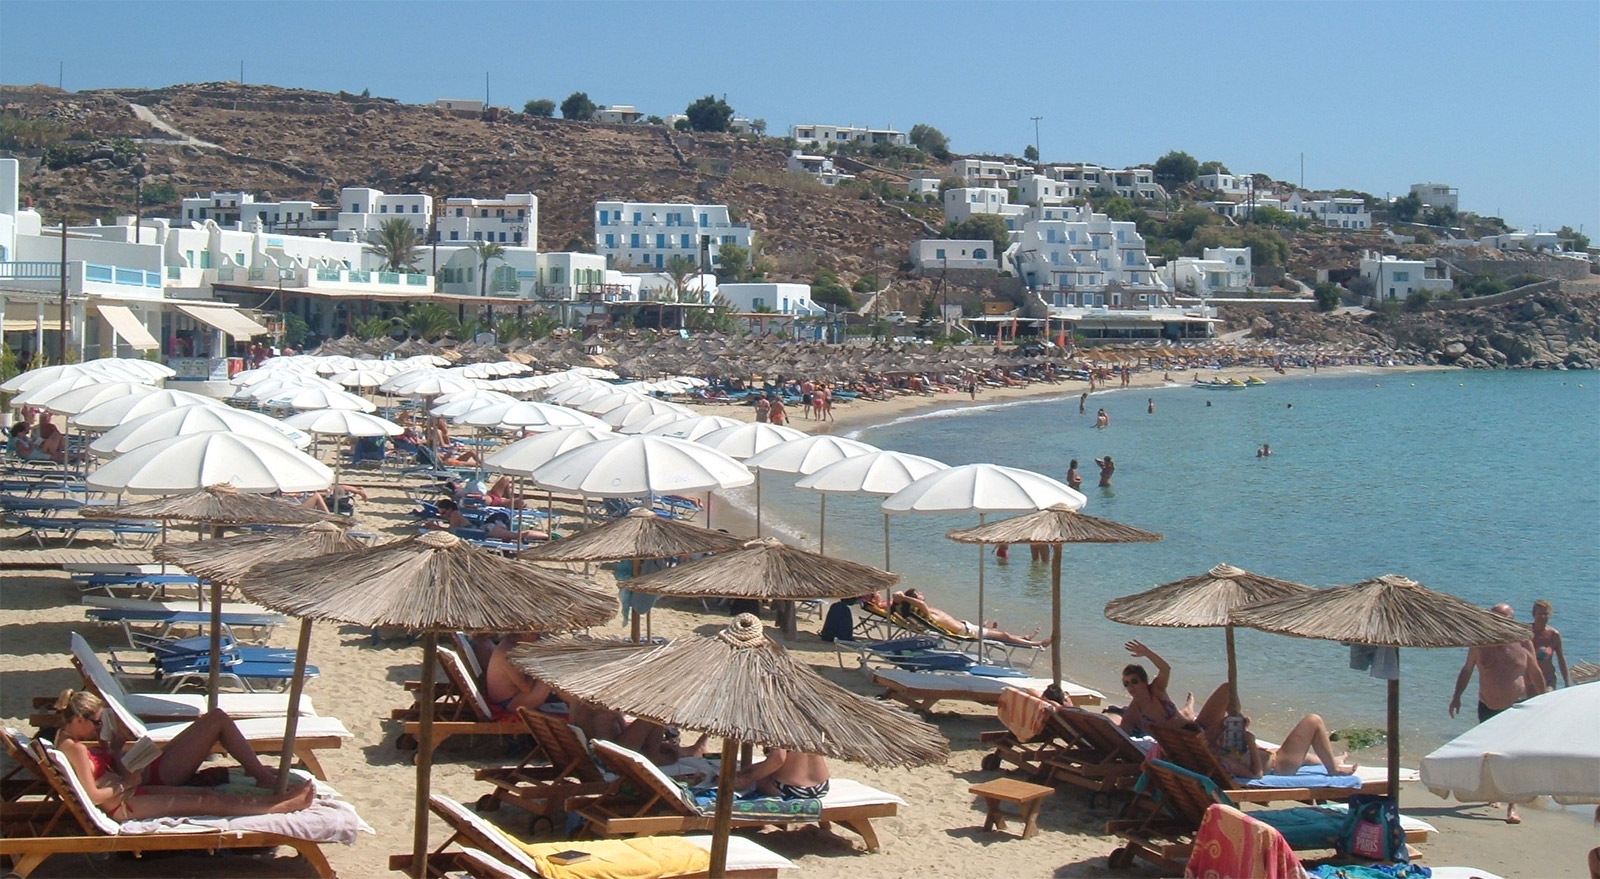 Platis Gialos, known for its beautiful beach, is another popular place to stay in Mykonos